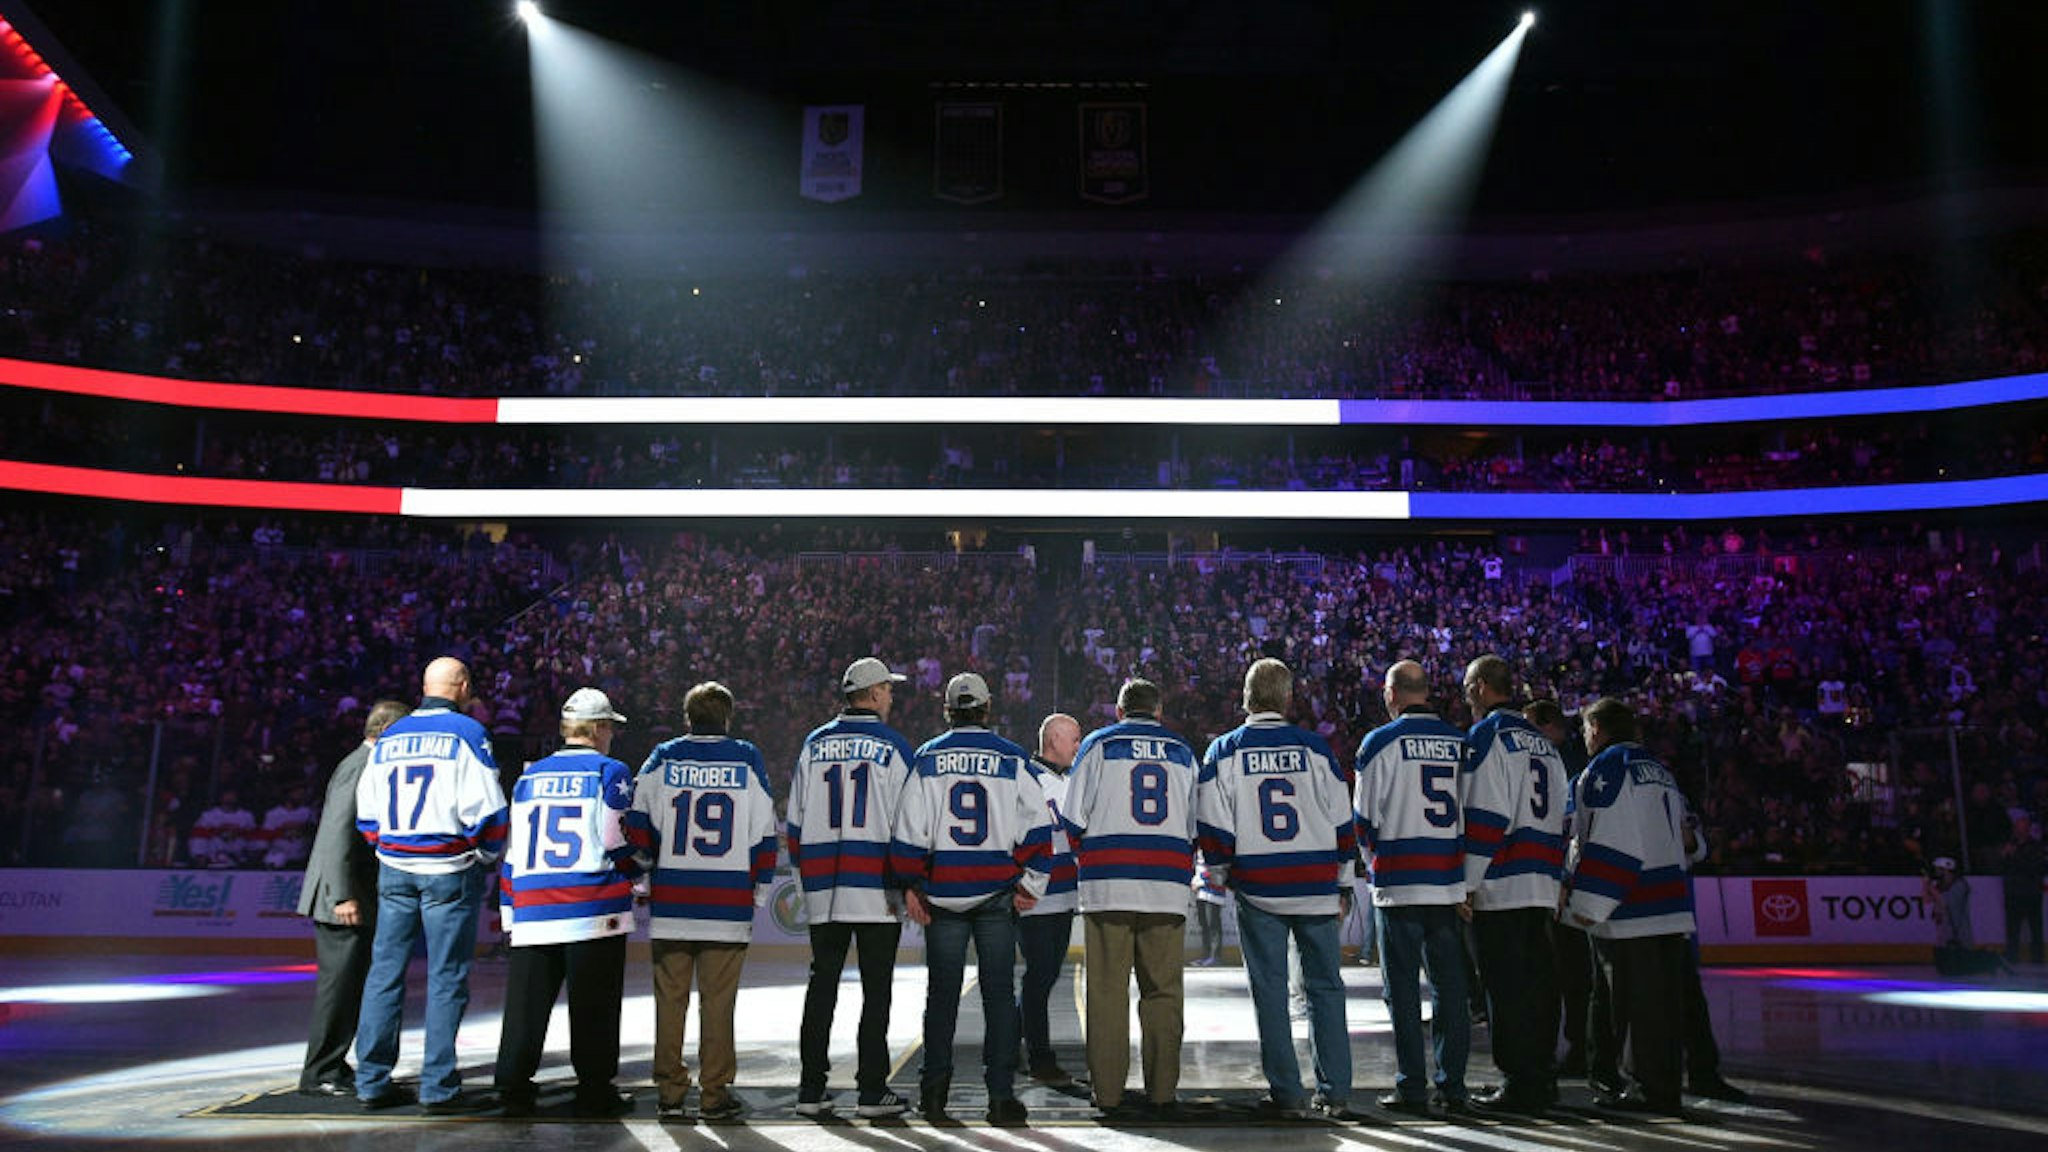 Members of the 1980 Team USA 'Miracle on Ice' team are honored prior to a game between the Vegas Golden Knights and the Florida Panthers at T-Mobile Arena on February 22, 2020 in Las Vegas, Nevada.